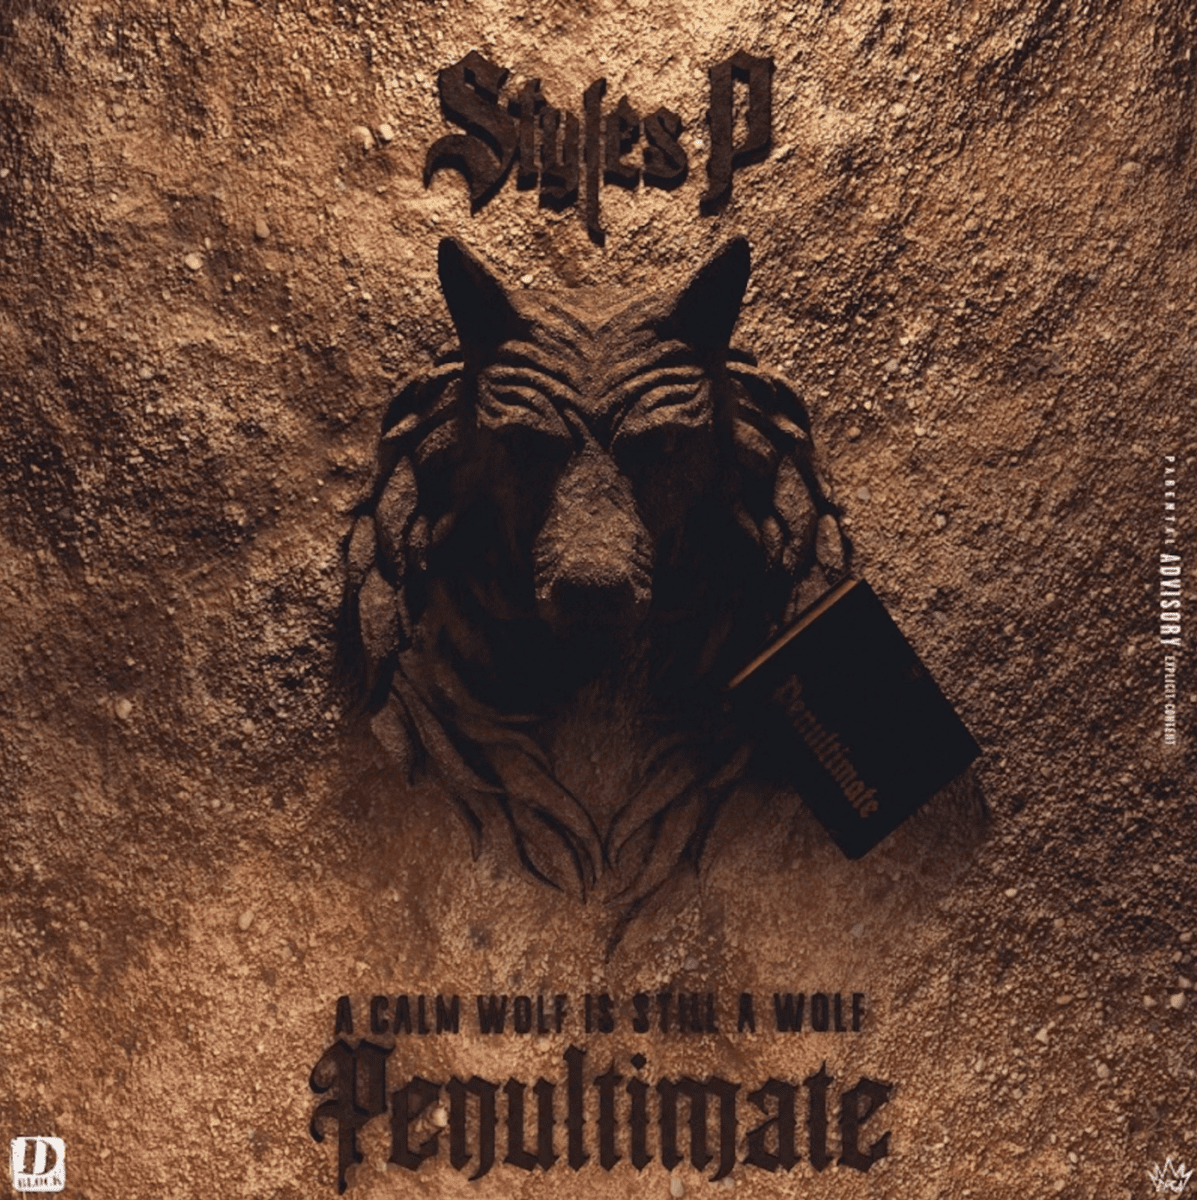 Styles P Drops His 15th Studio Album “Penultimate: A Calm Wolf Is Still A Wolf”